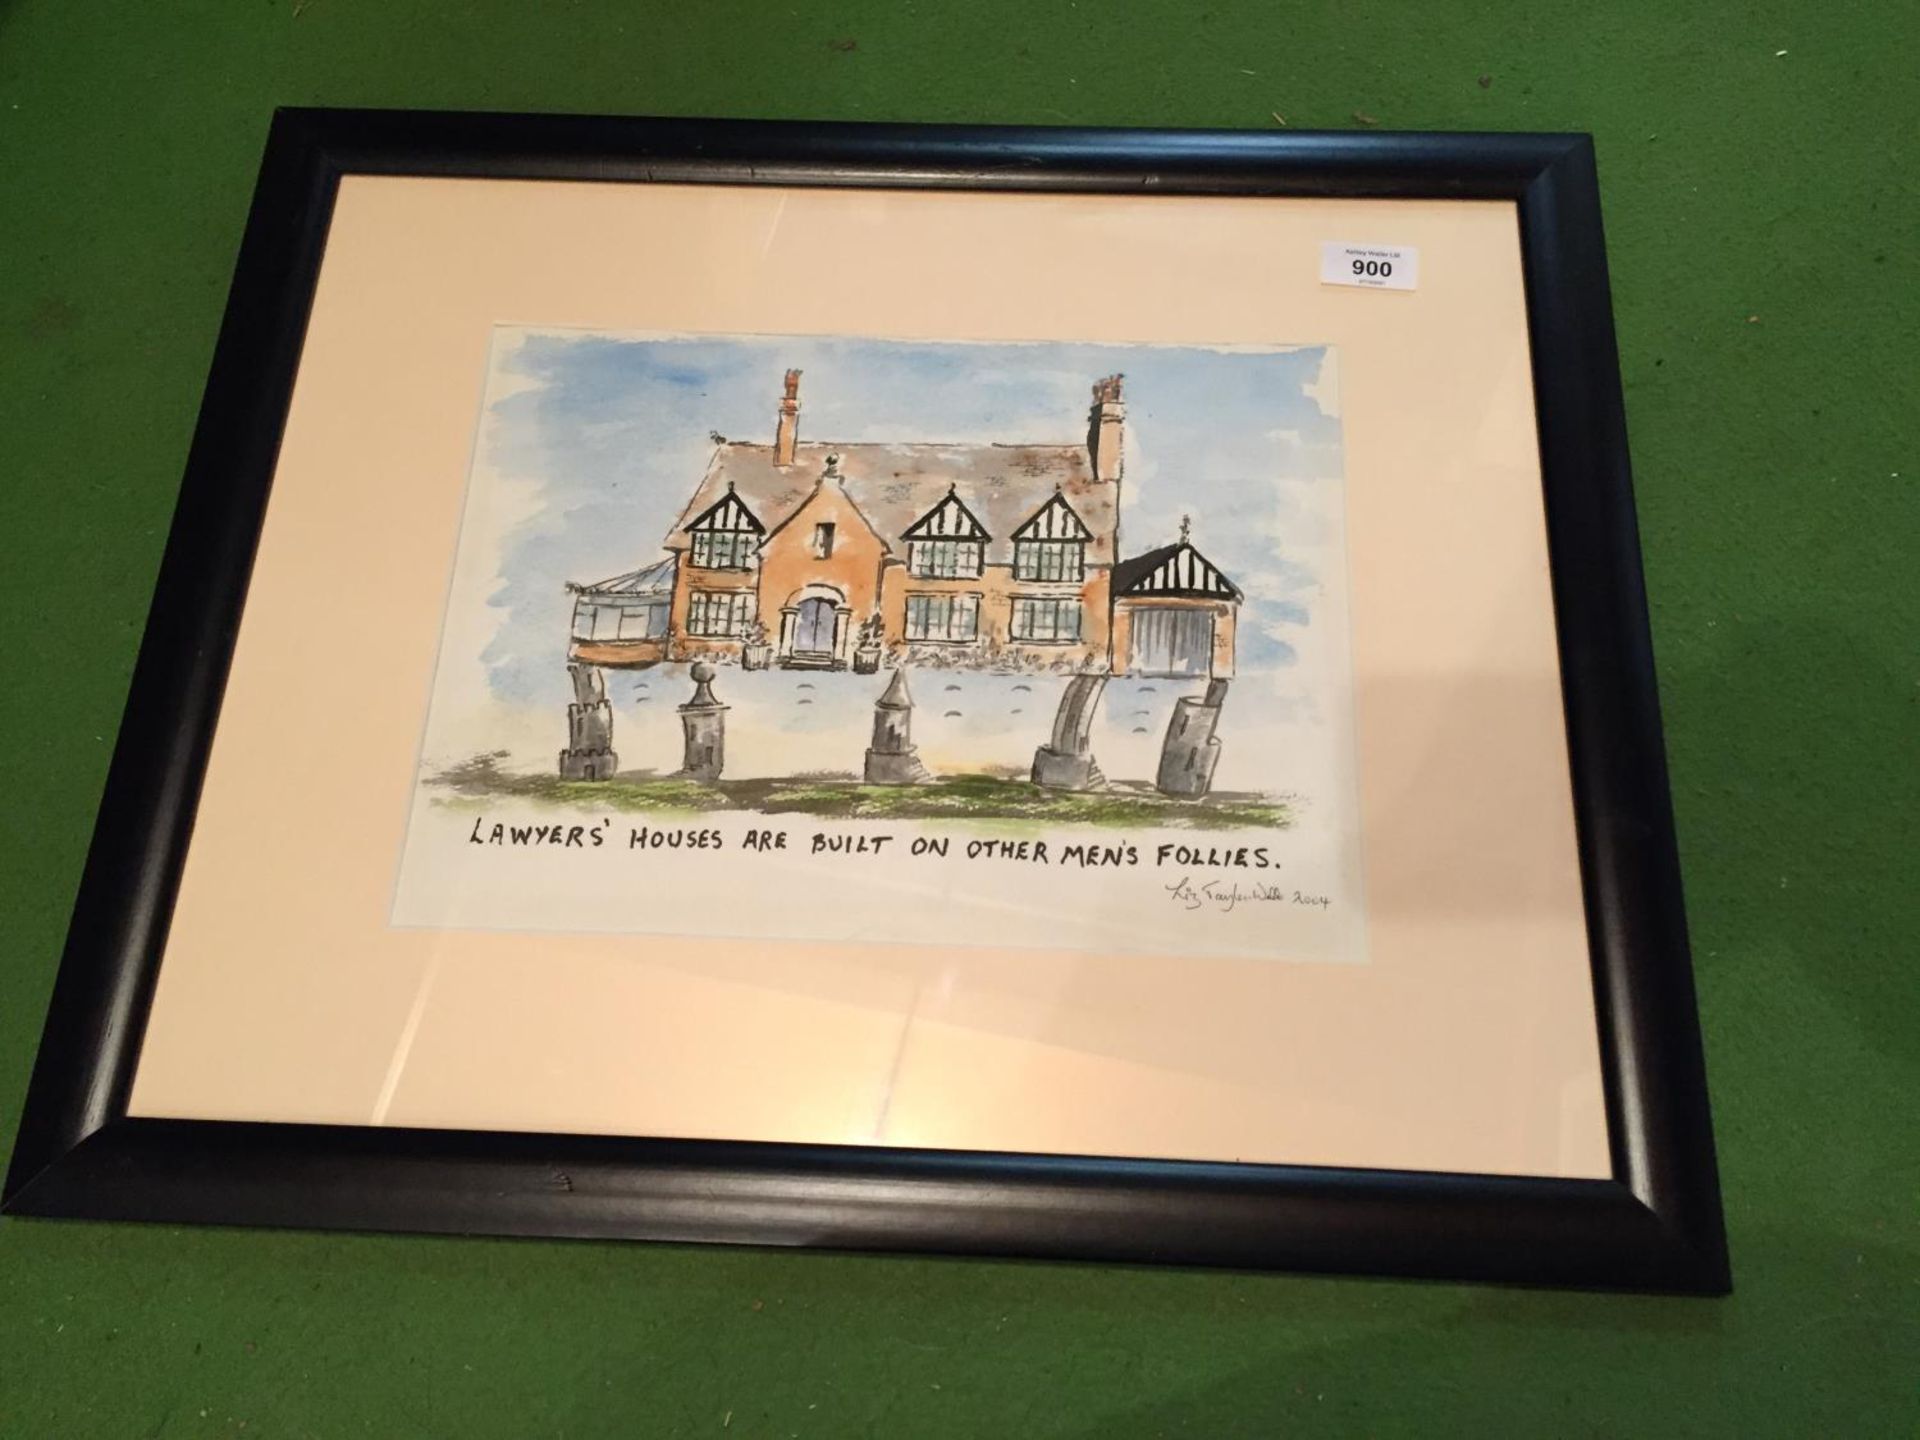 A SIGNED FRAMED PICTURE BY LIZ TAYLOR WEBB 2004, OF A HOUSE SAYING LAWYERS' HOUSES ARE BUILT ON